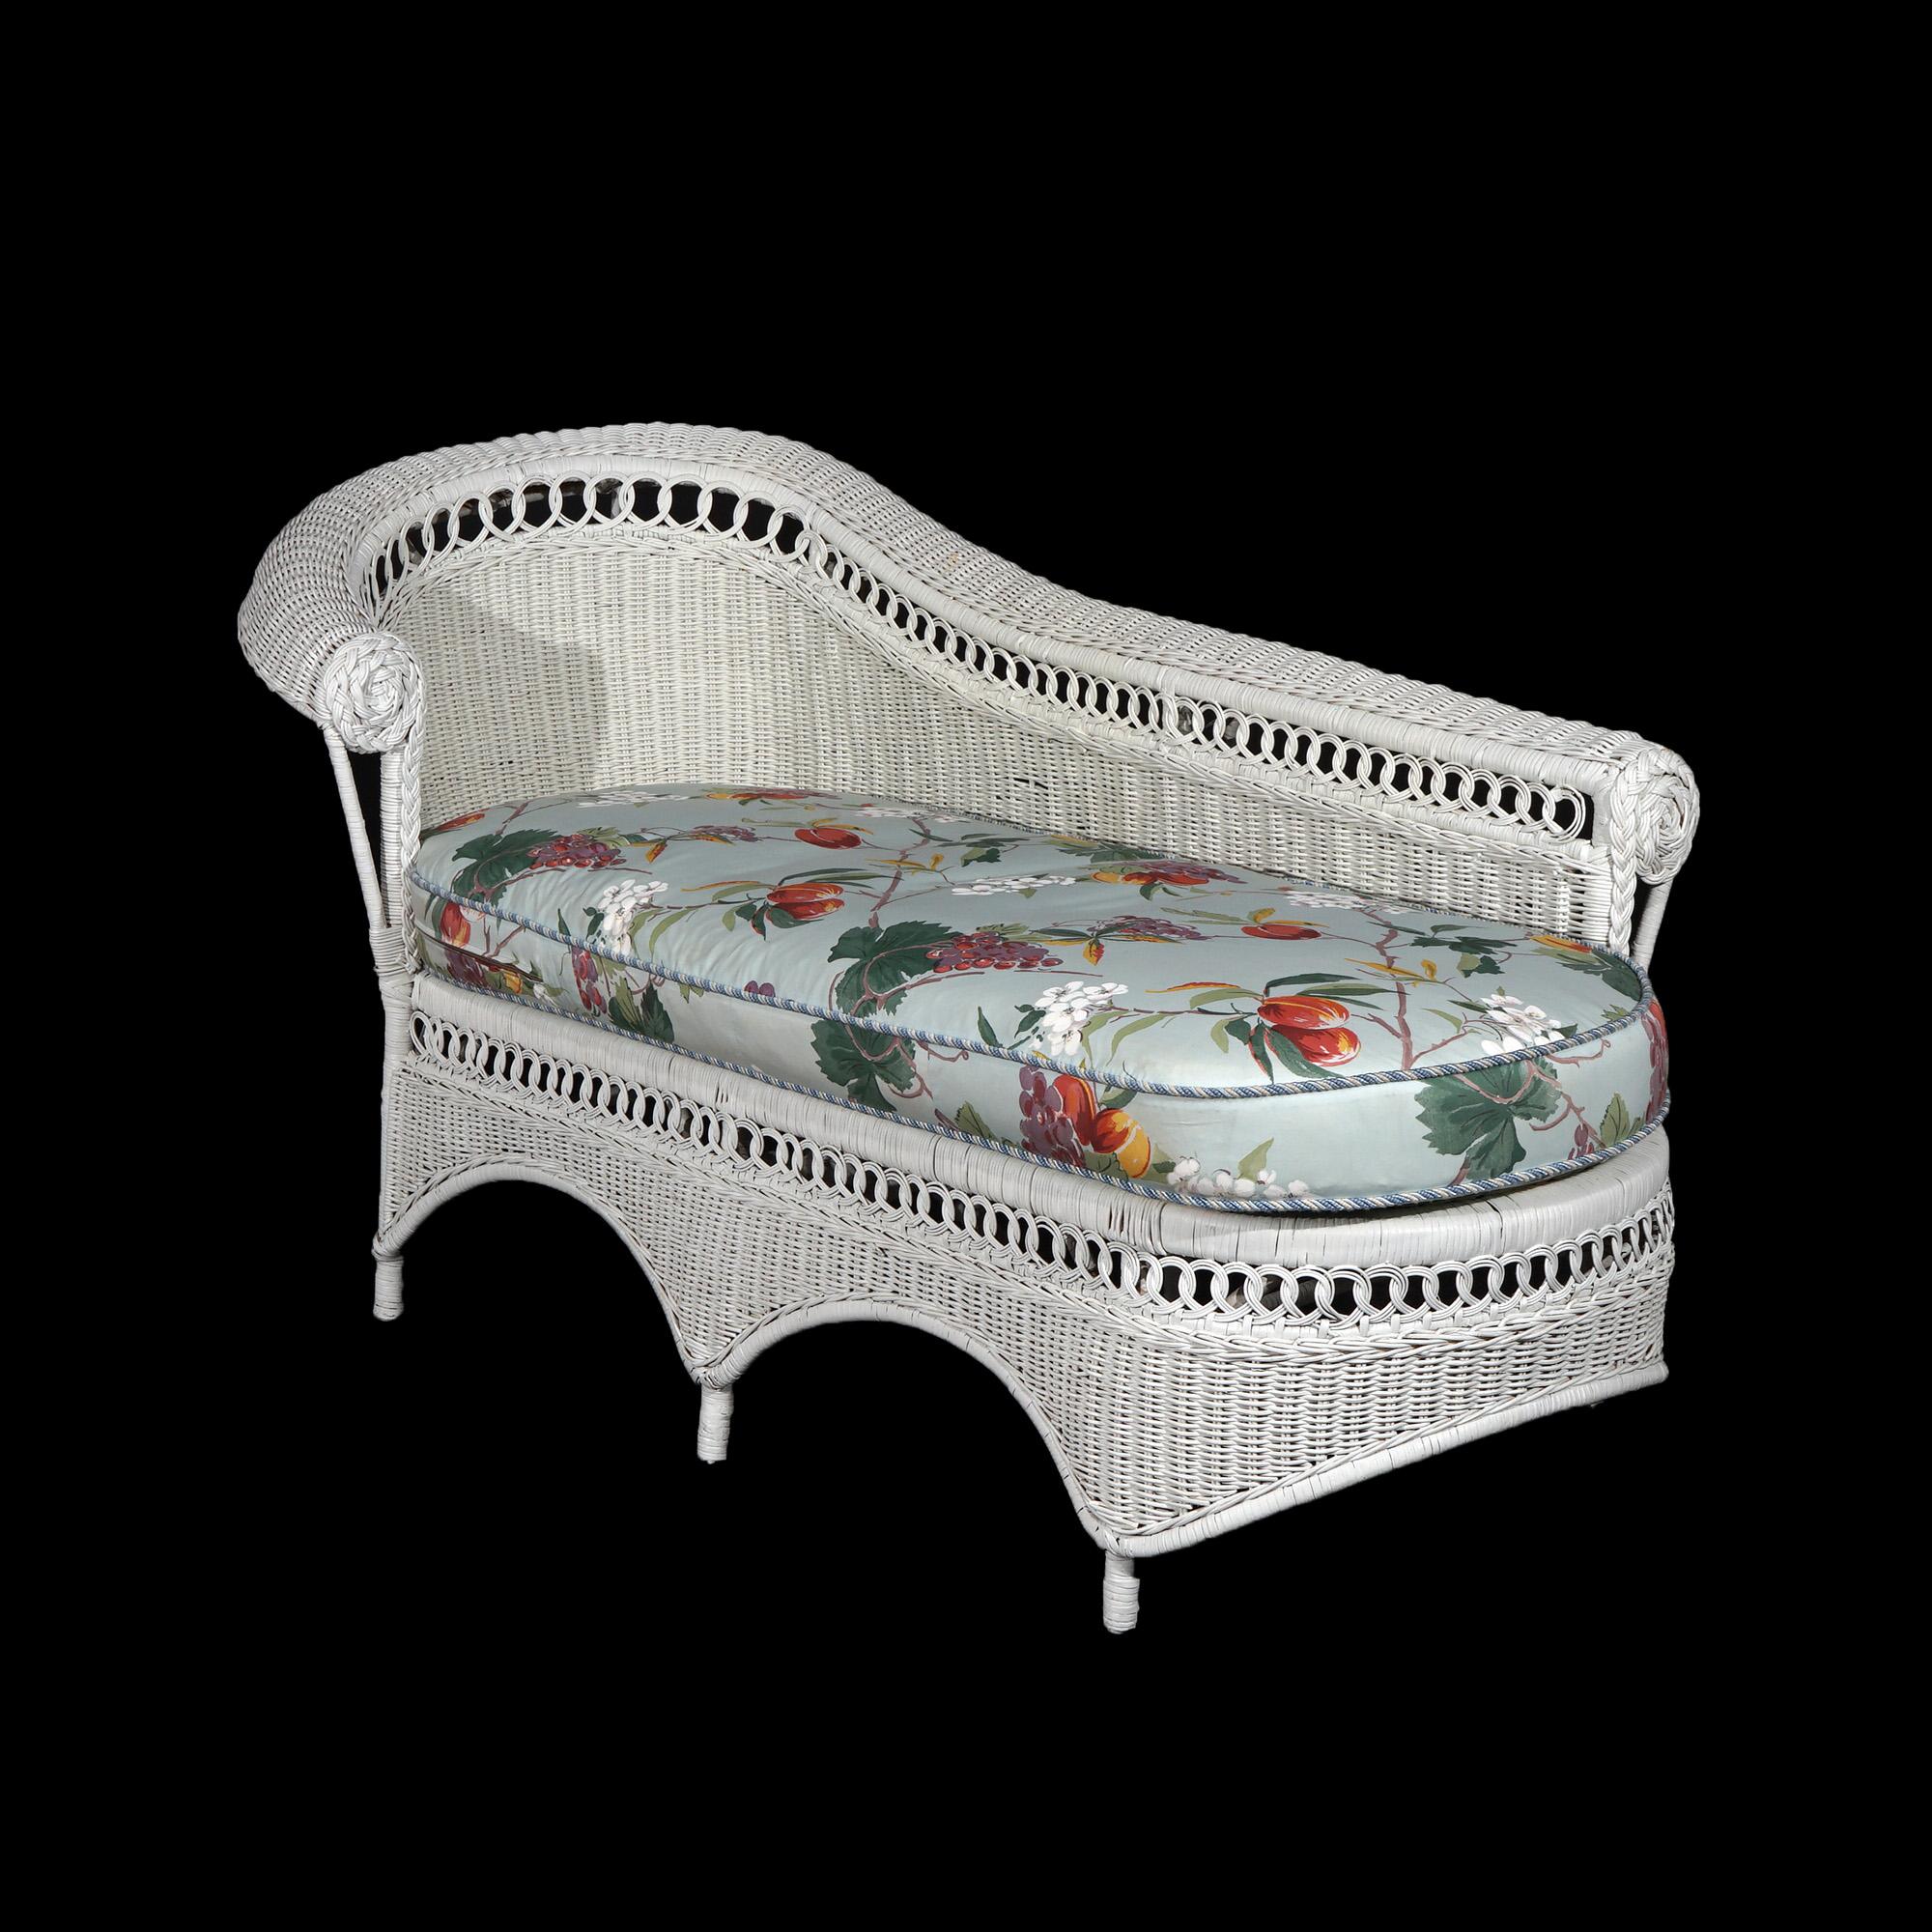 ***Ask About Reduced In-House Shipping Rates - Reliable Service & Fully Insured***
Heywood Wakefield School White Wicker Recamier with Floral Cushion, 20thC

Measures- 38.5''H x 33.5''W x 74''D; 16.25'' SH without cushion; 19''SH with cushion